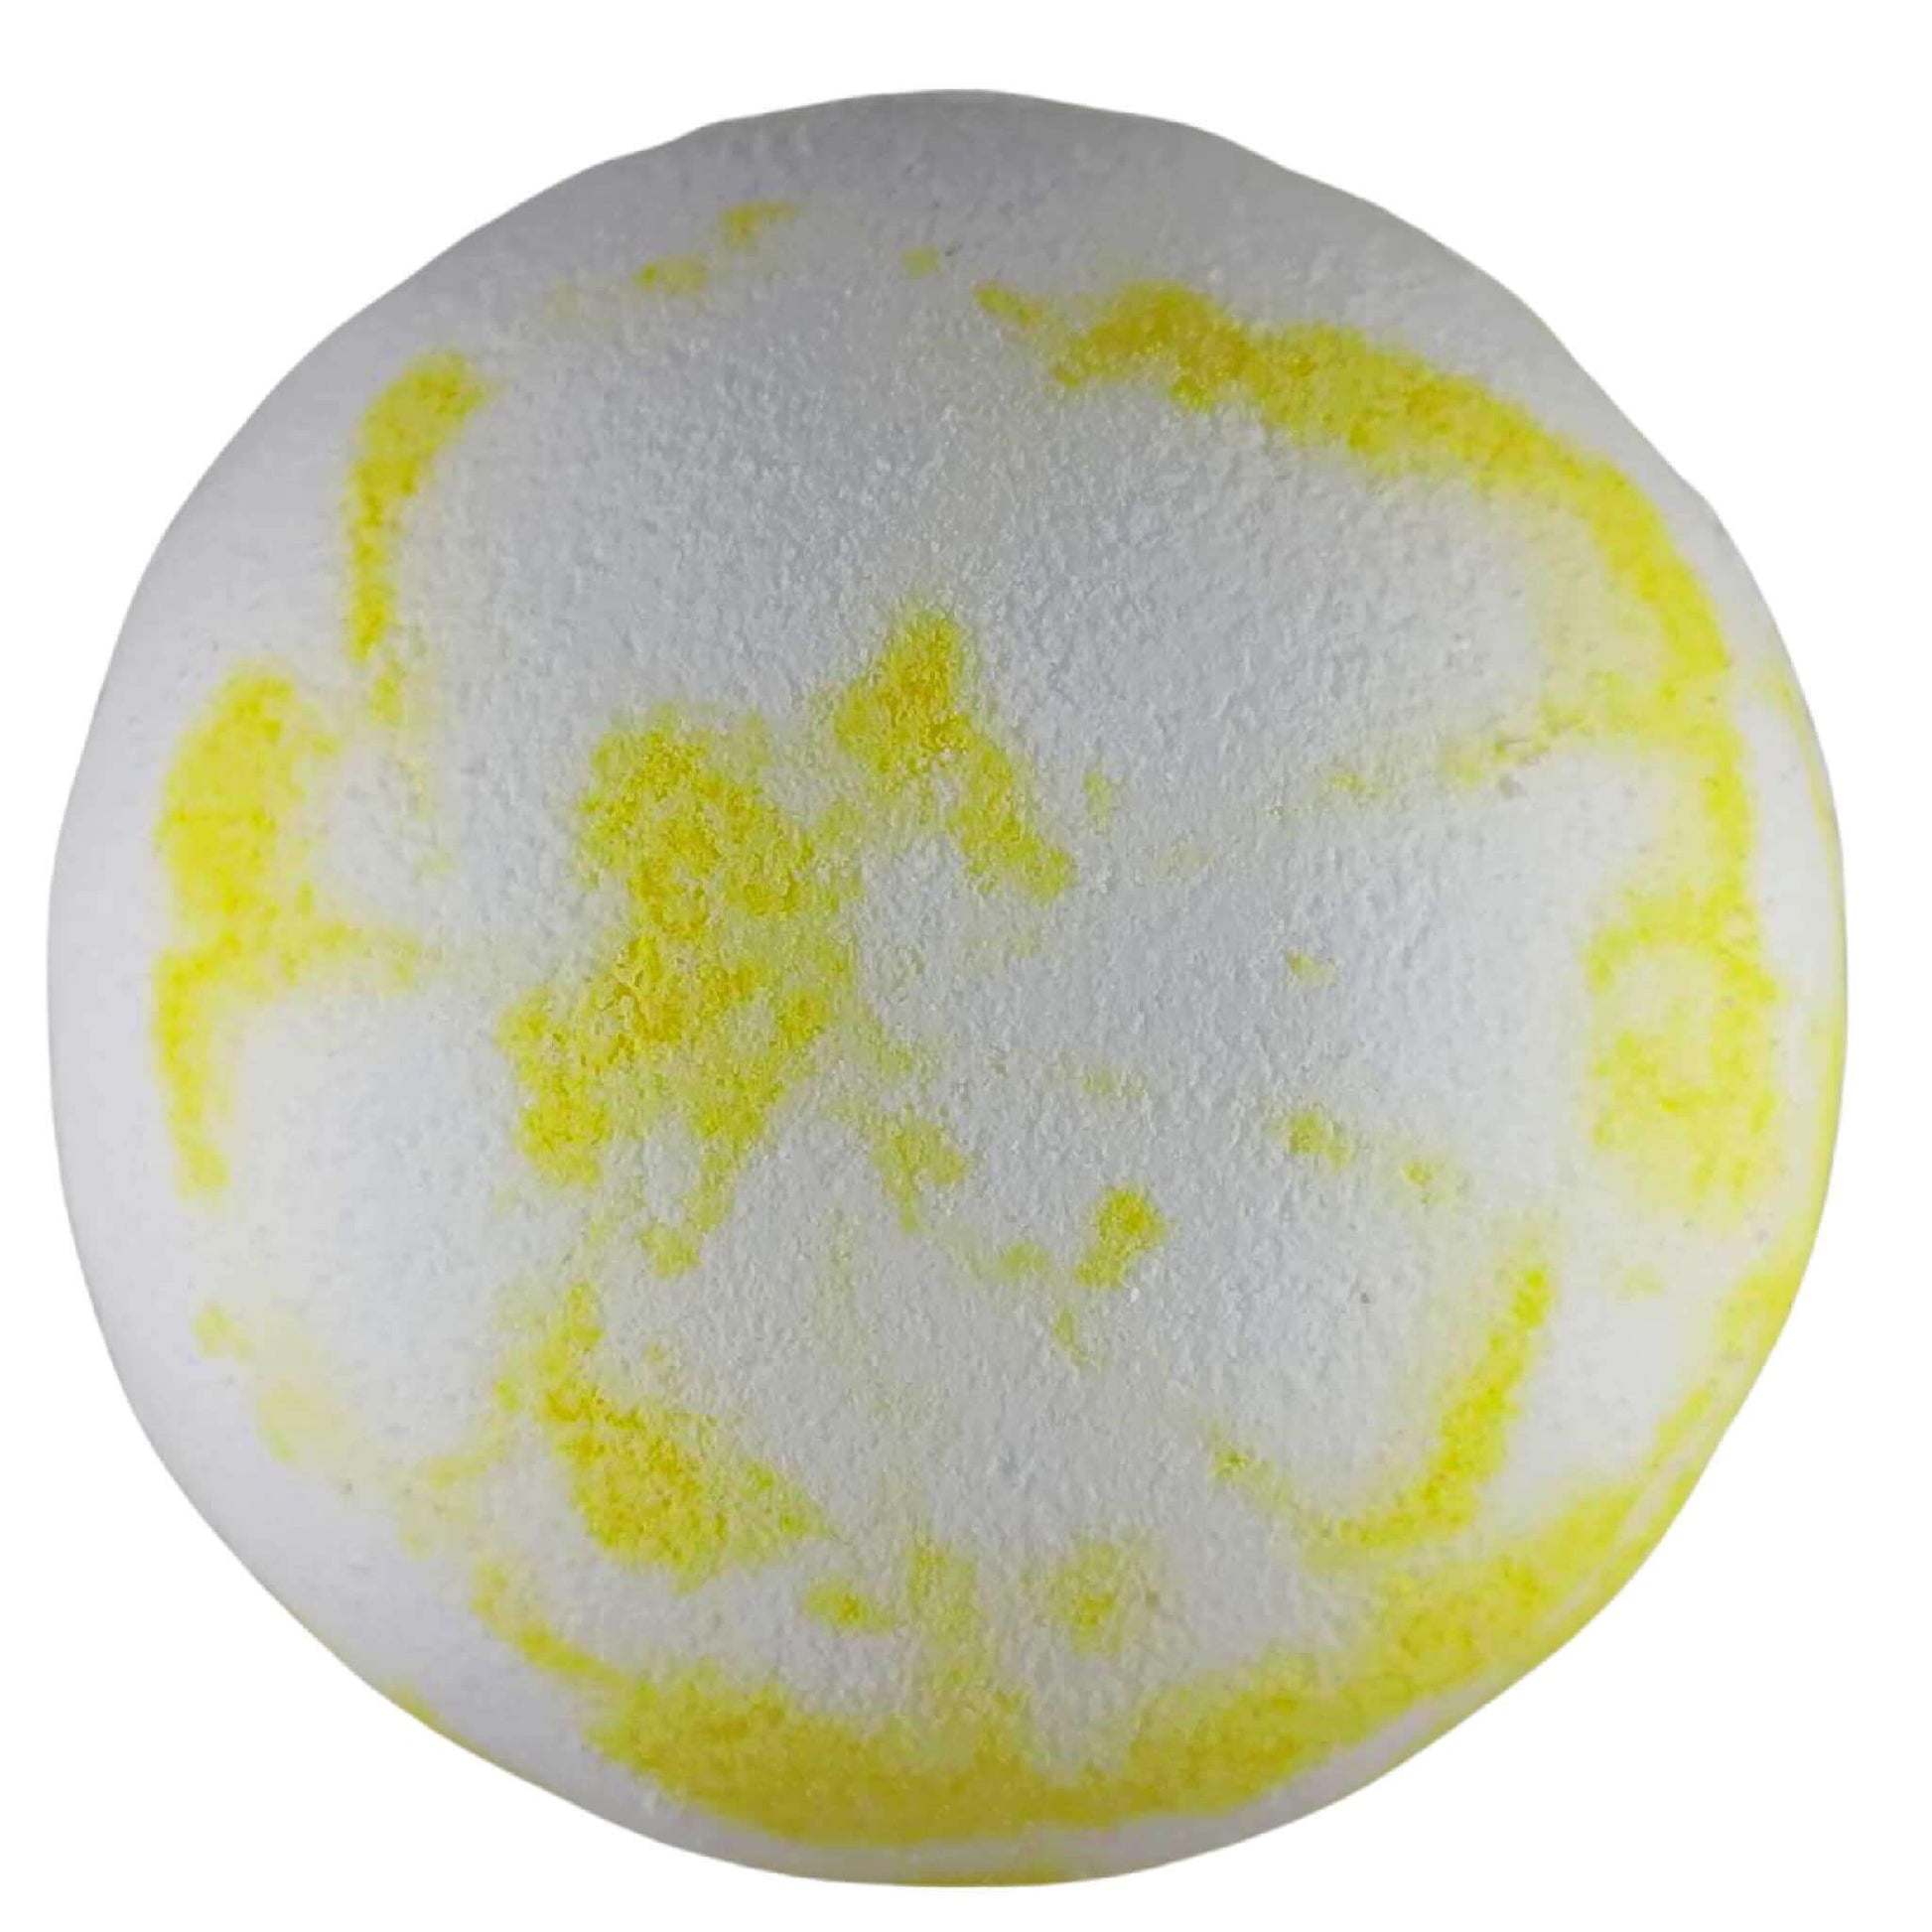 Discover your zen with the Meditation Aromatherapy Bath Bomb, infused with the delicate aroma of orange patchouli.